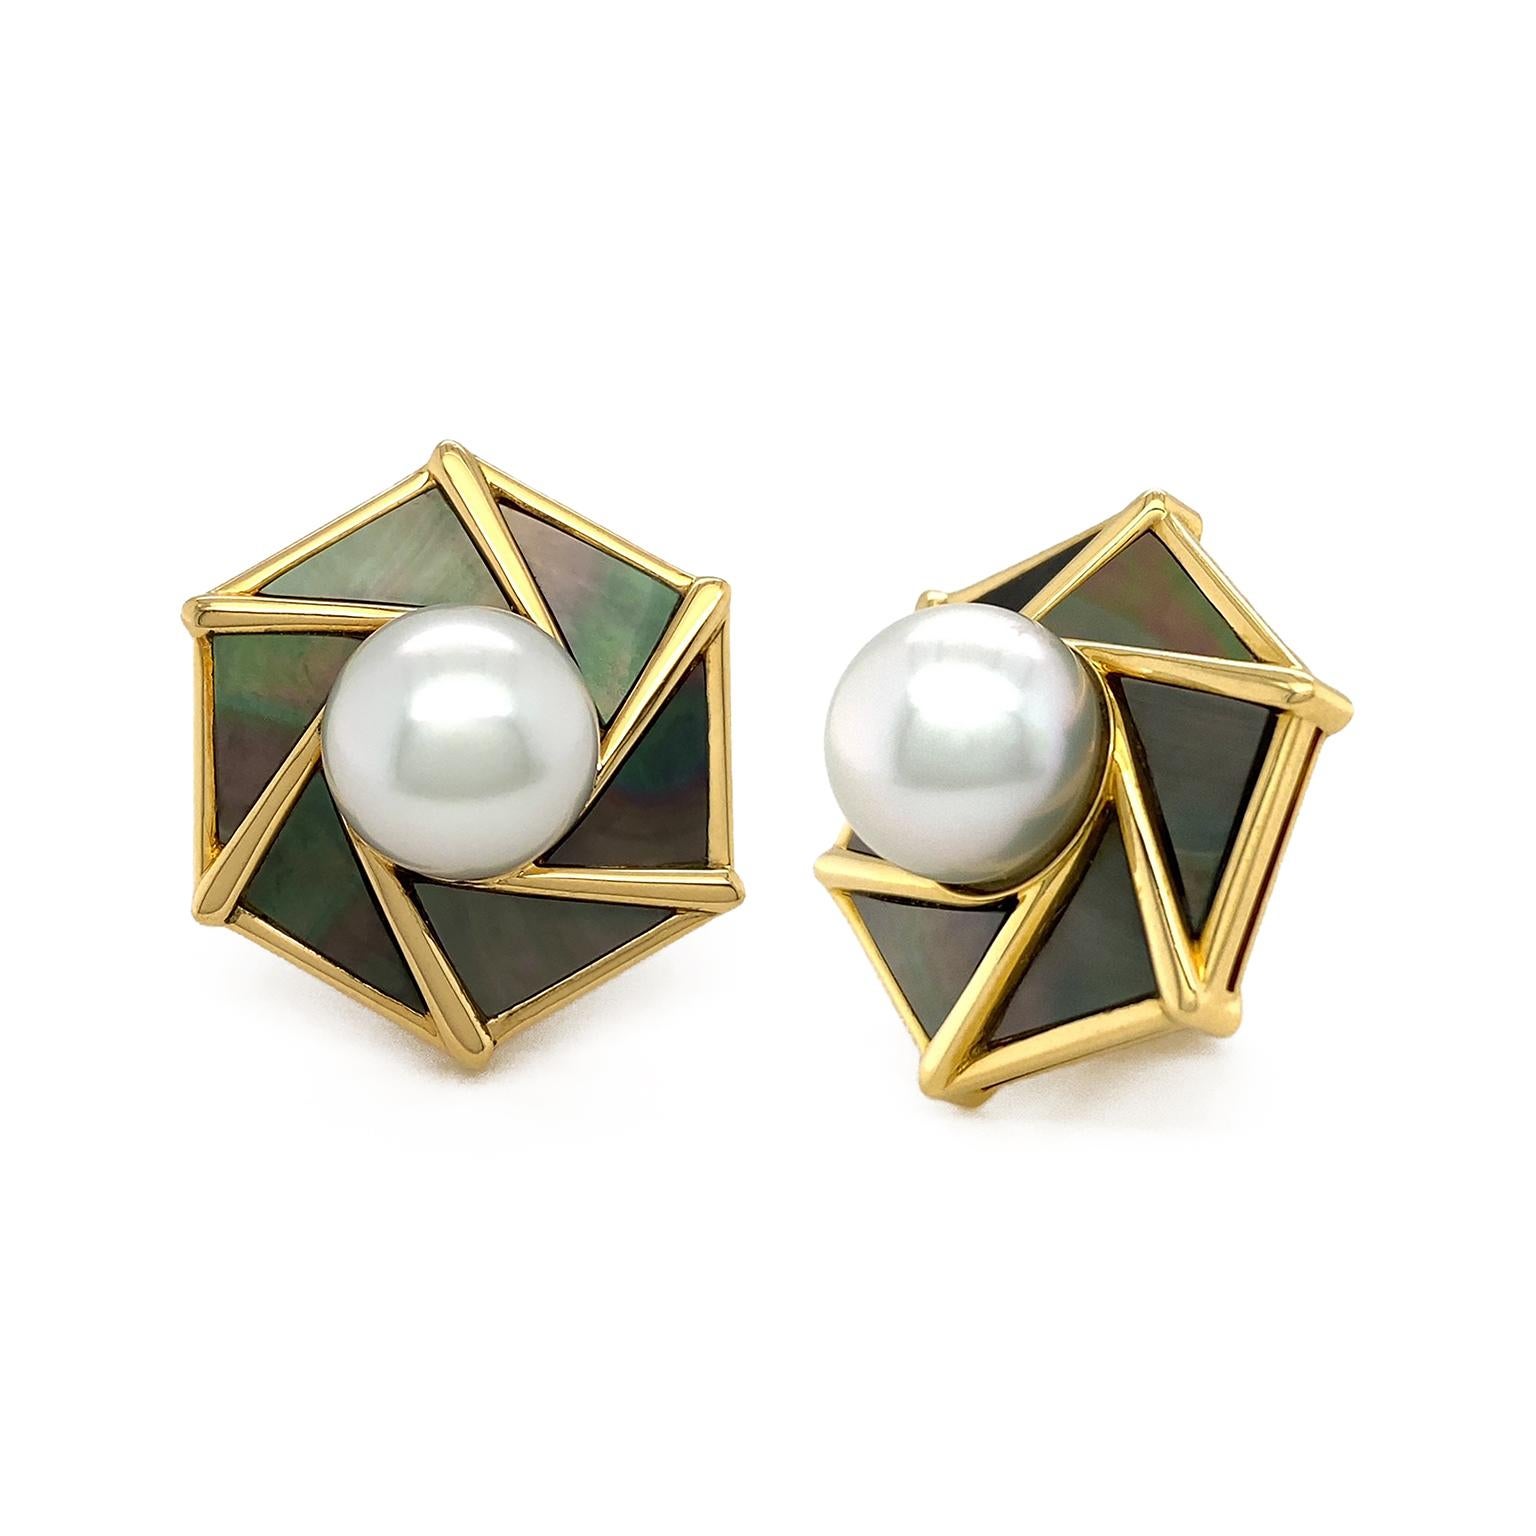 Prismatic black mother of pearl encompasses a white pearl for these earrings. 18k yellow gold strands outline the edges, as well as where each specially cut mother of pearl meet. Black mother of pearl is formed on the interior of oyster shells by